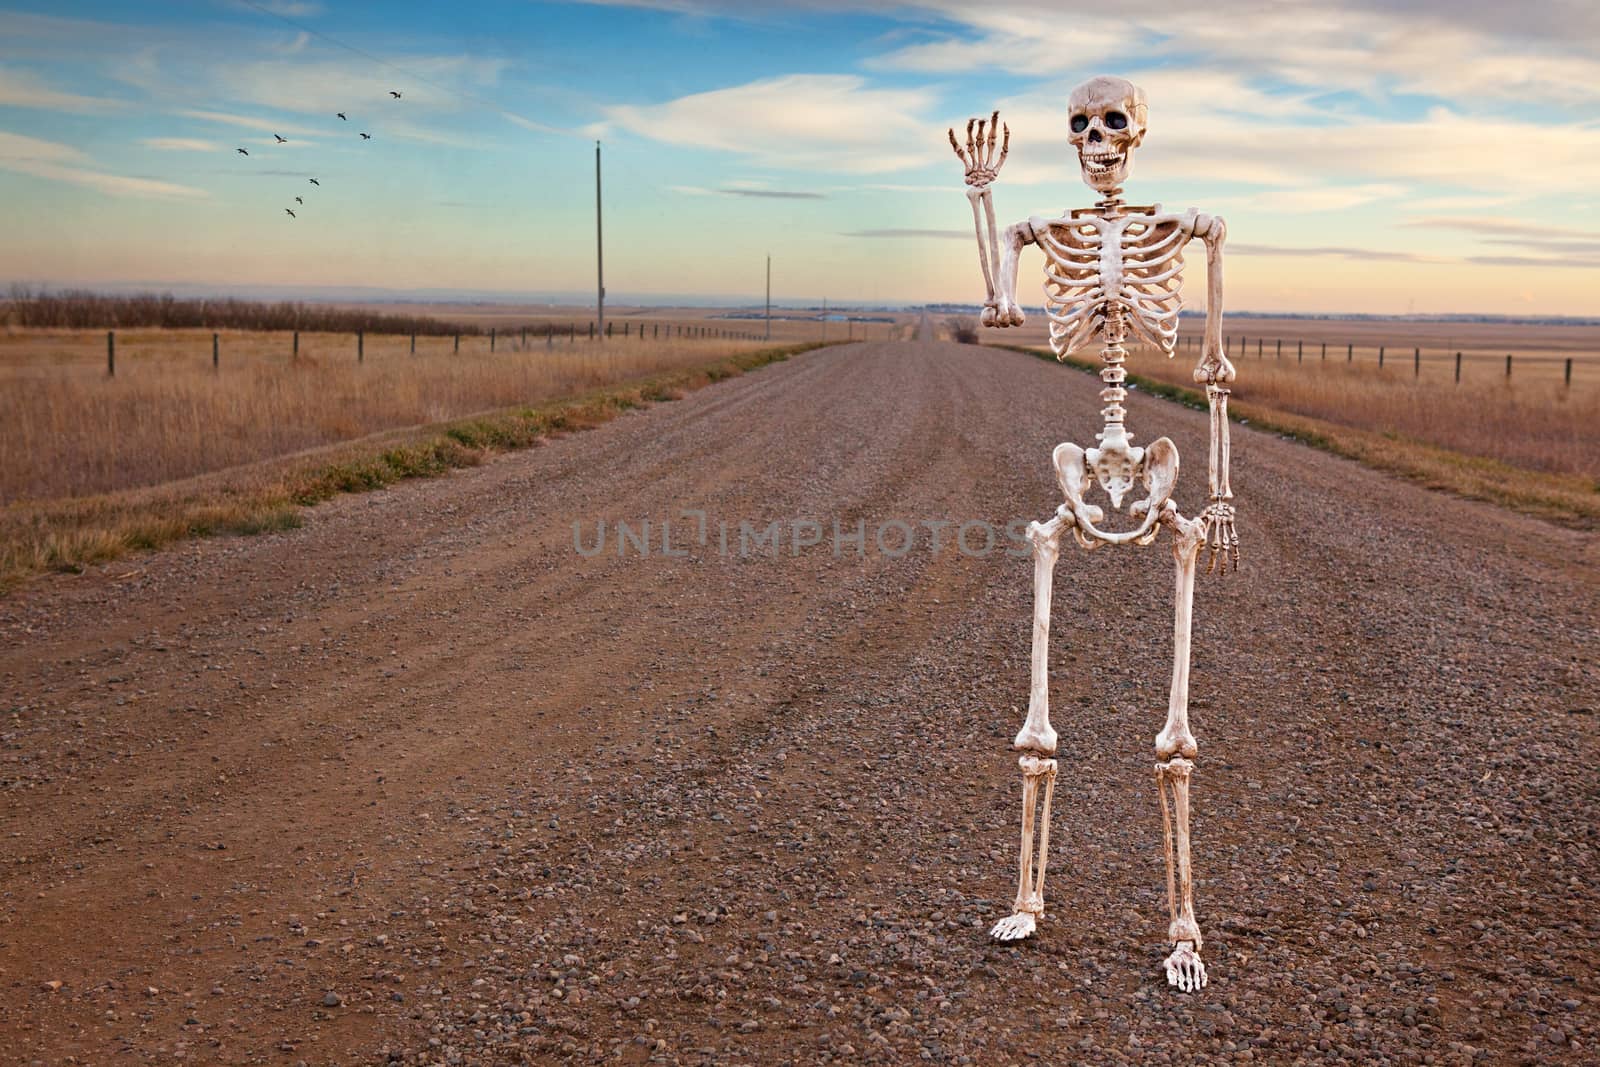 Country Roads Skeleton by songbird839